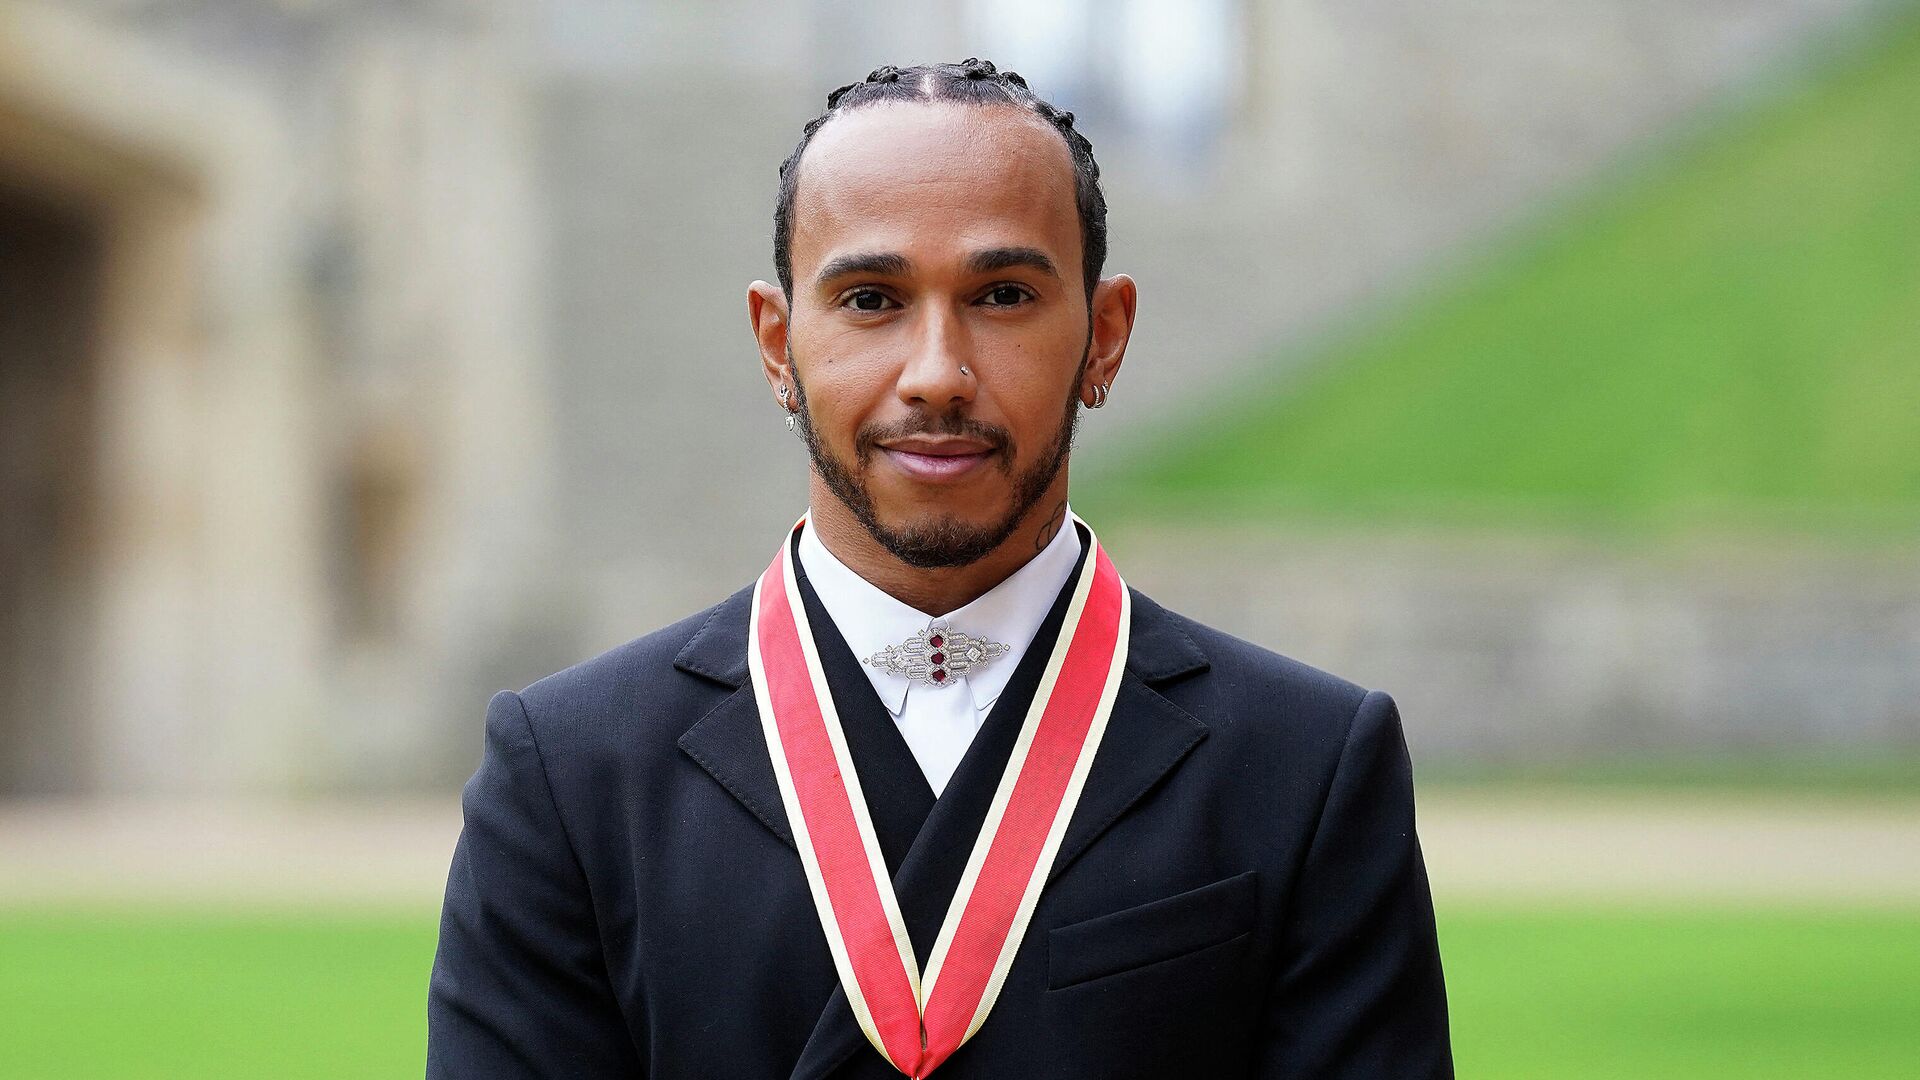 Mercedes' British F1 driver Lewis Hamilton poses with his medal after being appointed as a Knight Bachelor (Knighthood) for services to motorsports, by the Britain's Prince Charles, Prince of Wales, during a investiture ceremony at Windsor Castle in Windsor, west of London on December 15, 2021. - Lewis Hamilton received his knighthood on Wednesday as the British driver comes to terms with controversially losing the Formula One world title. (Photo by Andrew Matthews / POOL / AFP) - РИА Новости, 1920, 16.12.2021